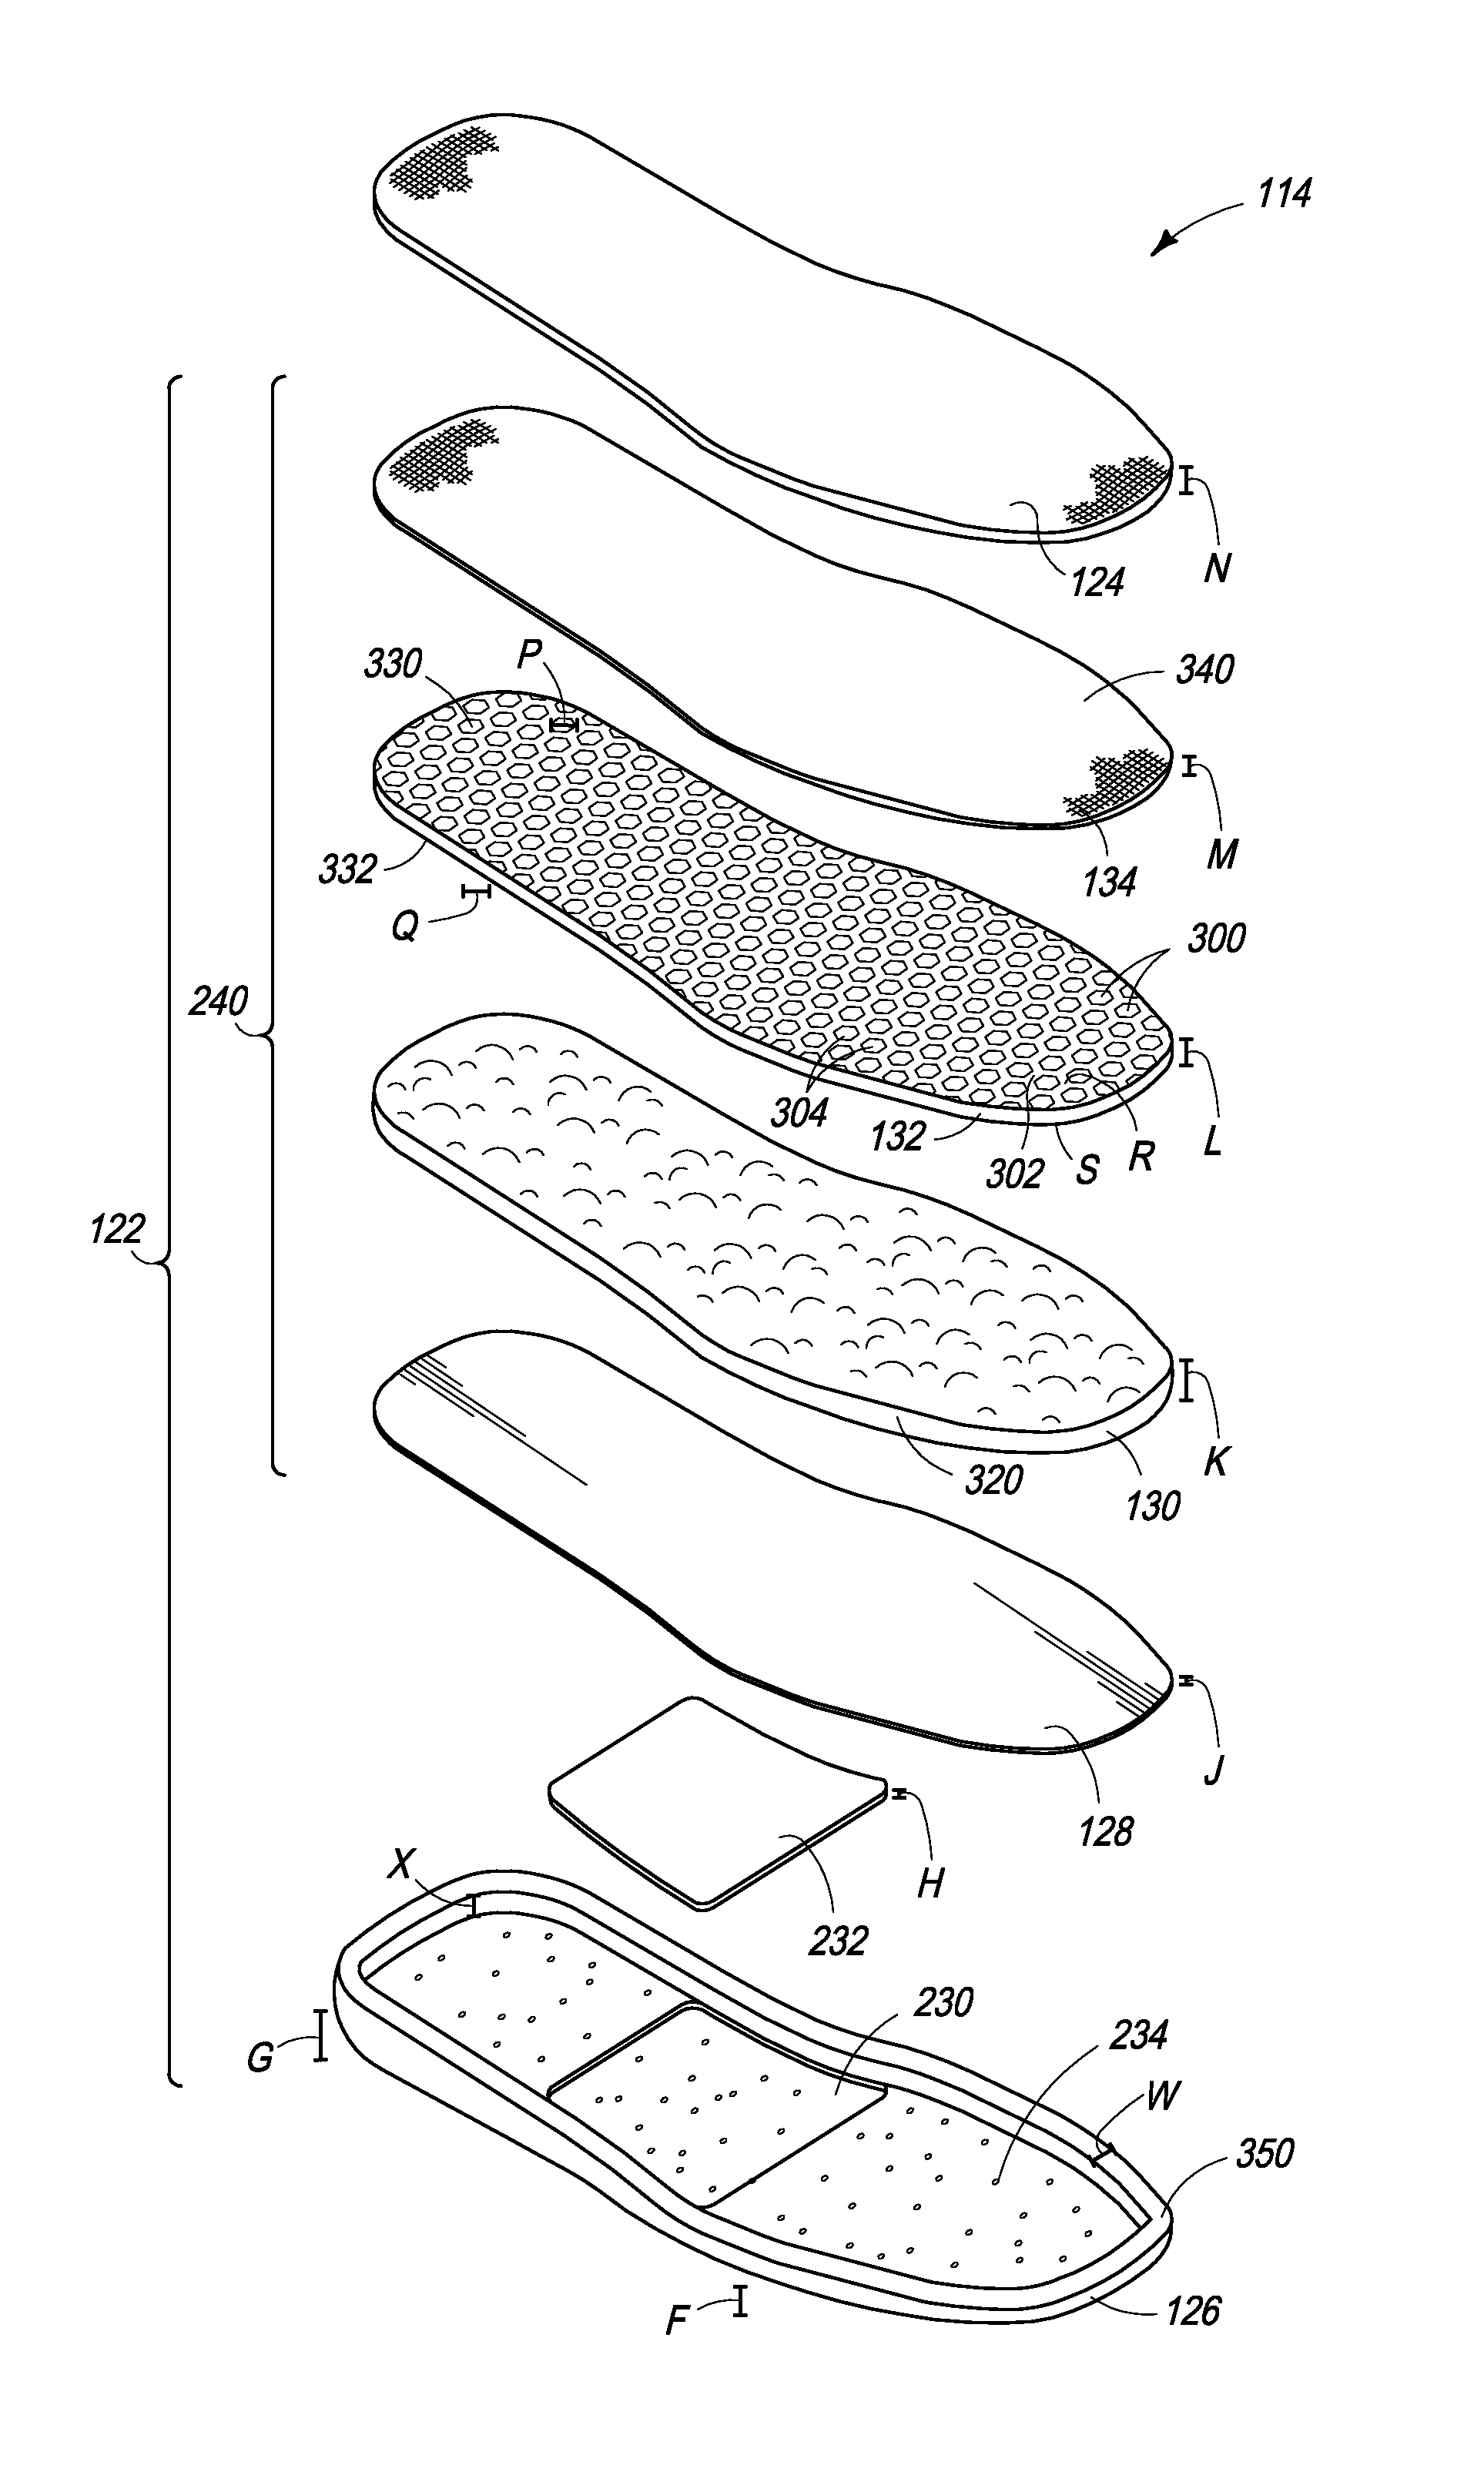 Heat retention and insulation system for wearable articles